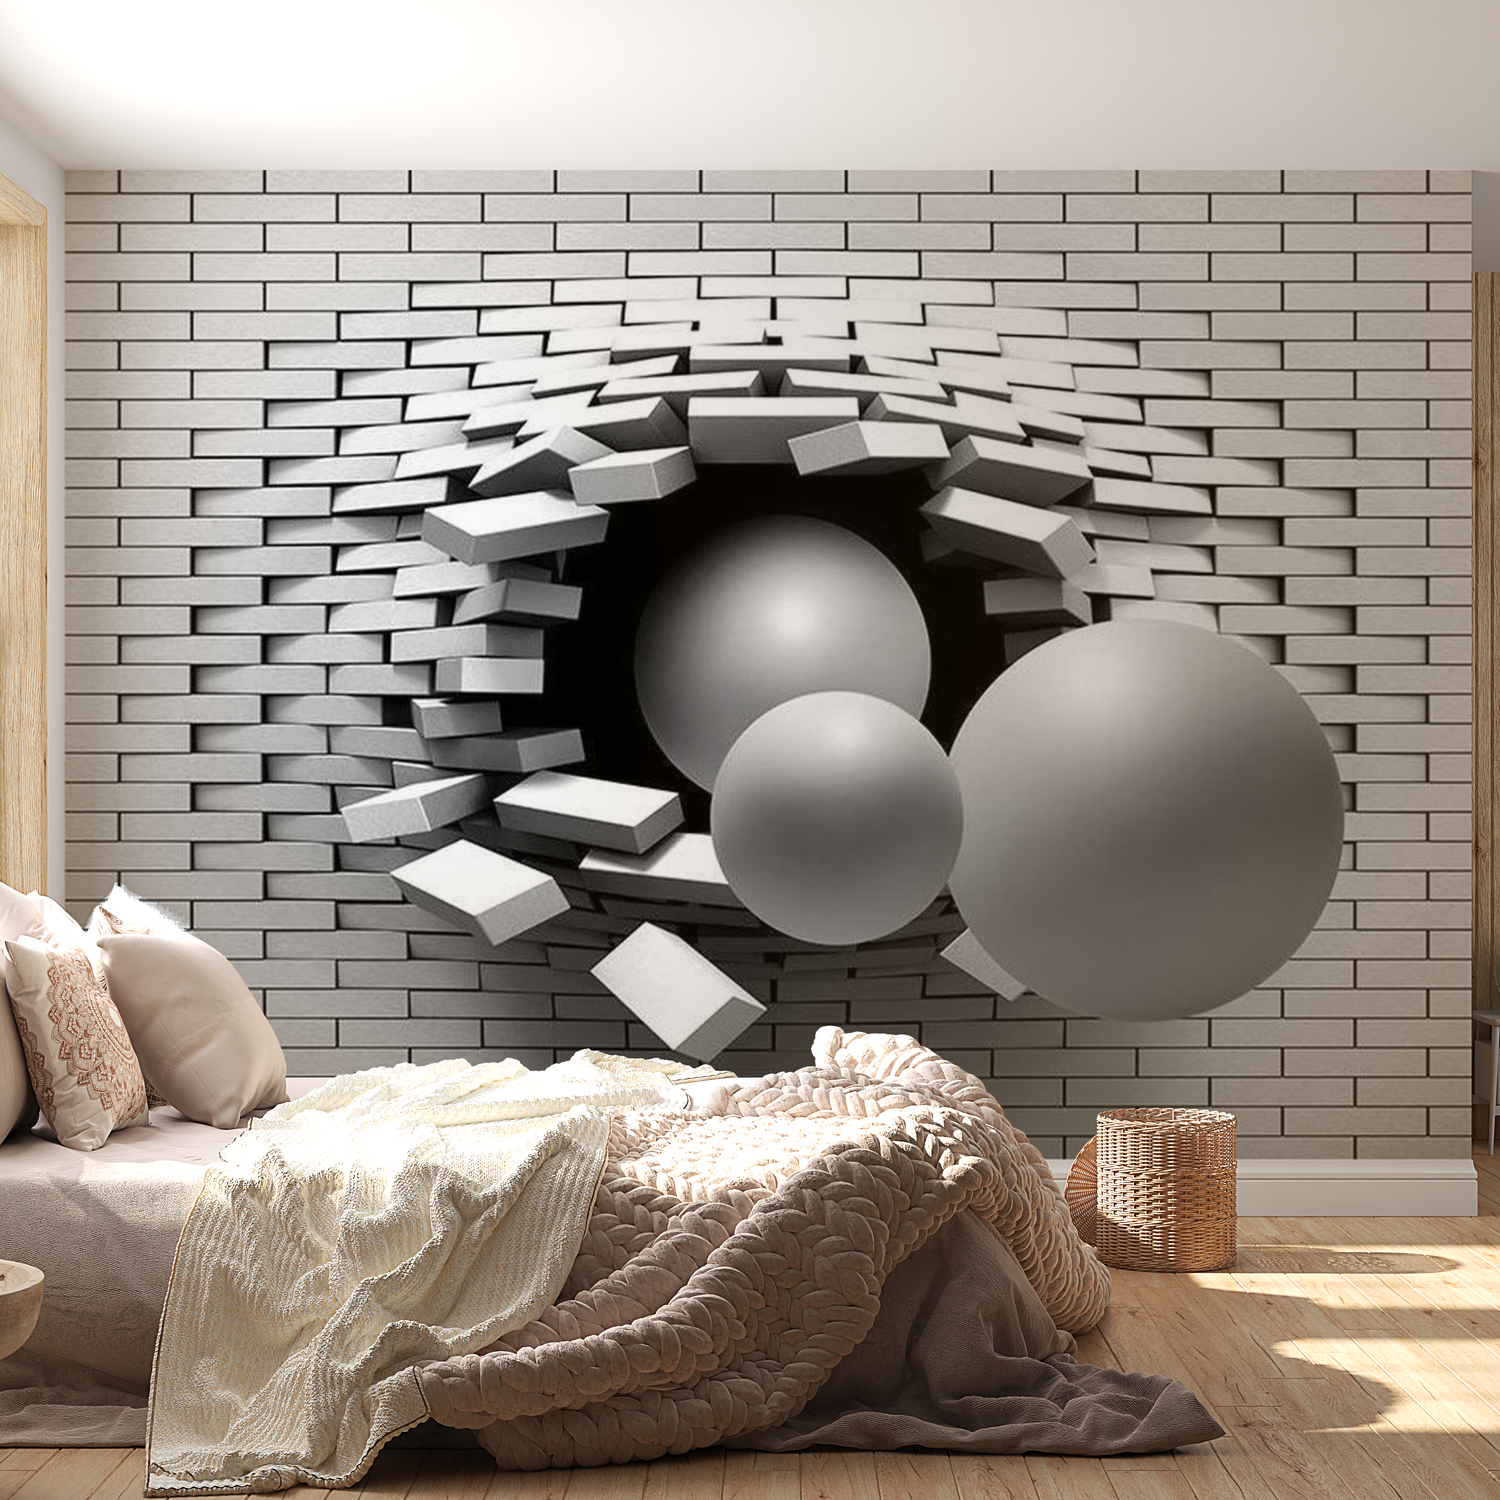 3D Illusion Wallpaper Wall Mural - Brick In The Wall 39"Wx27"H